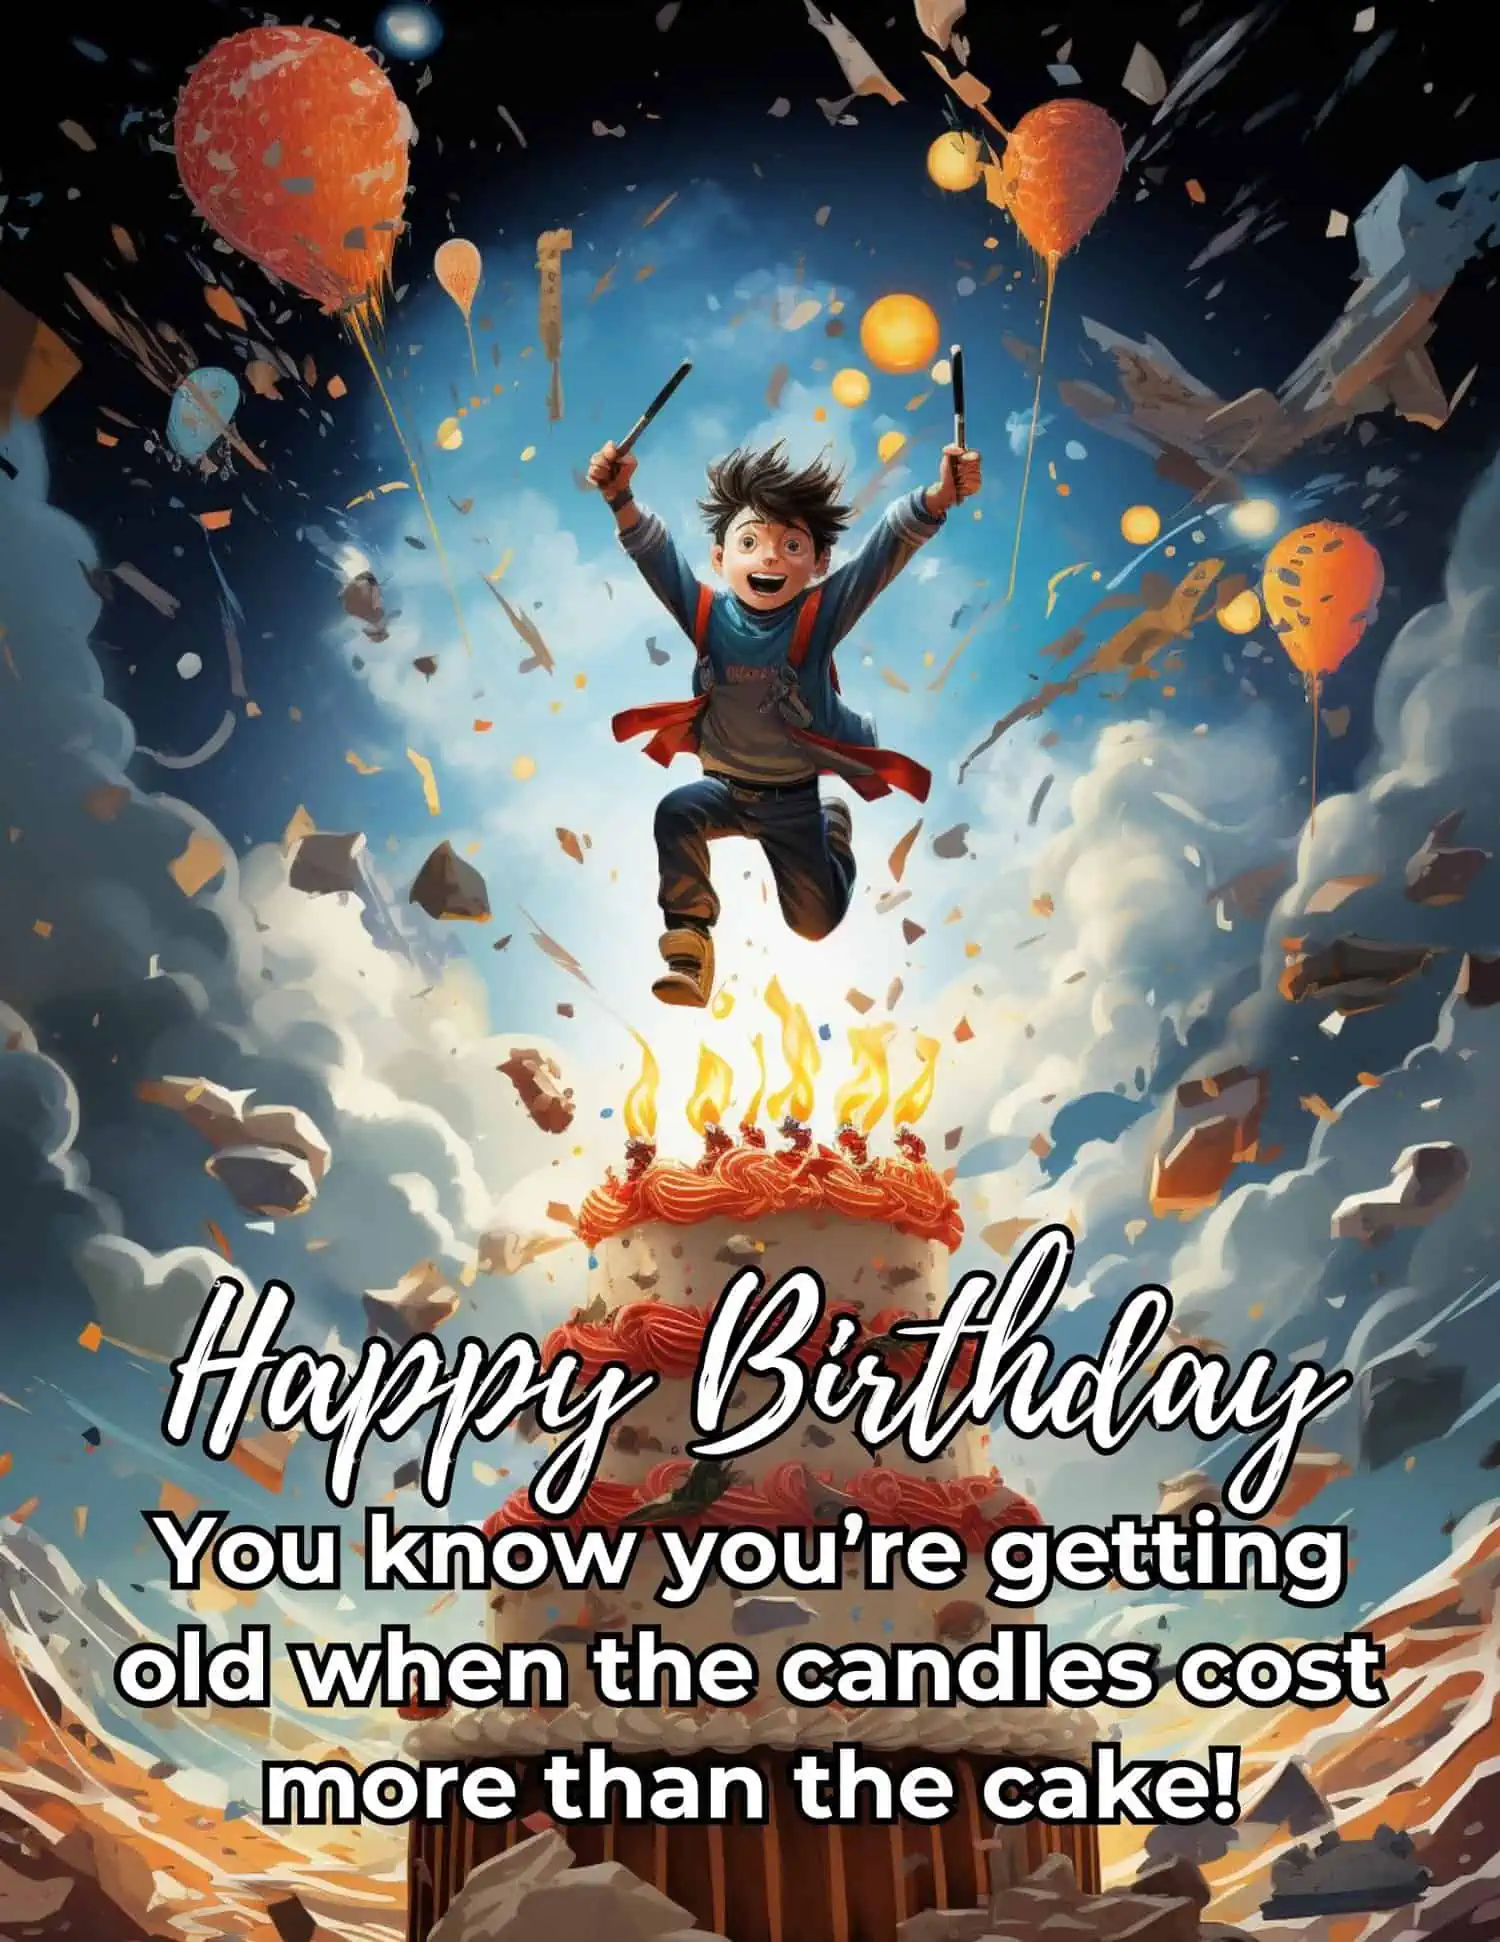 A compilation of funny and lighthearted birthday wishes designed to bring a smile to your son's face.